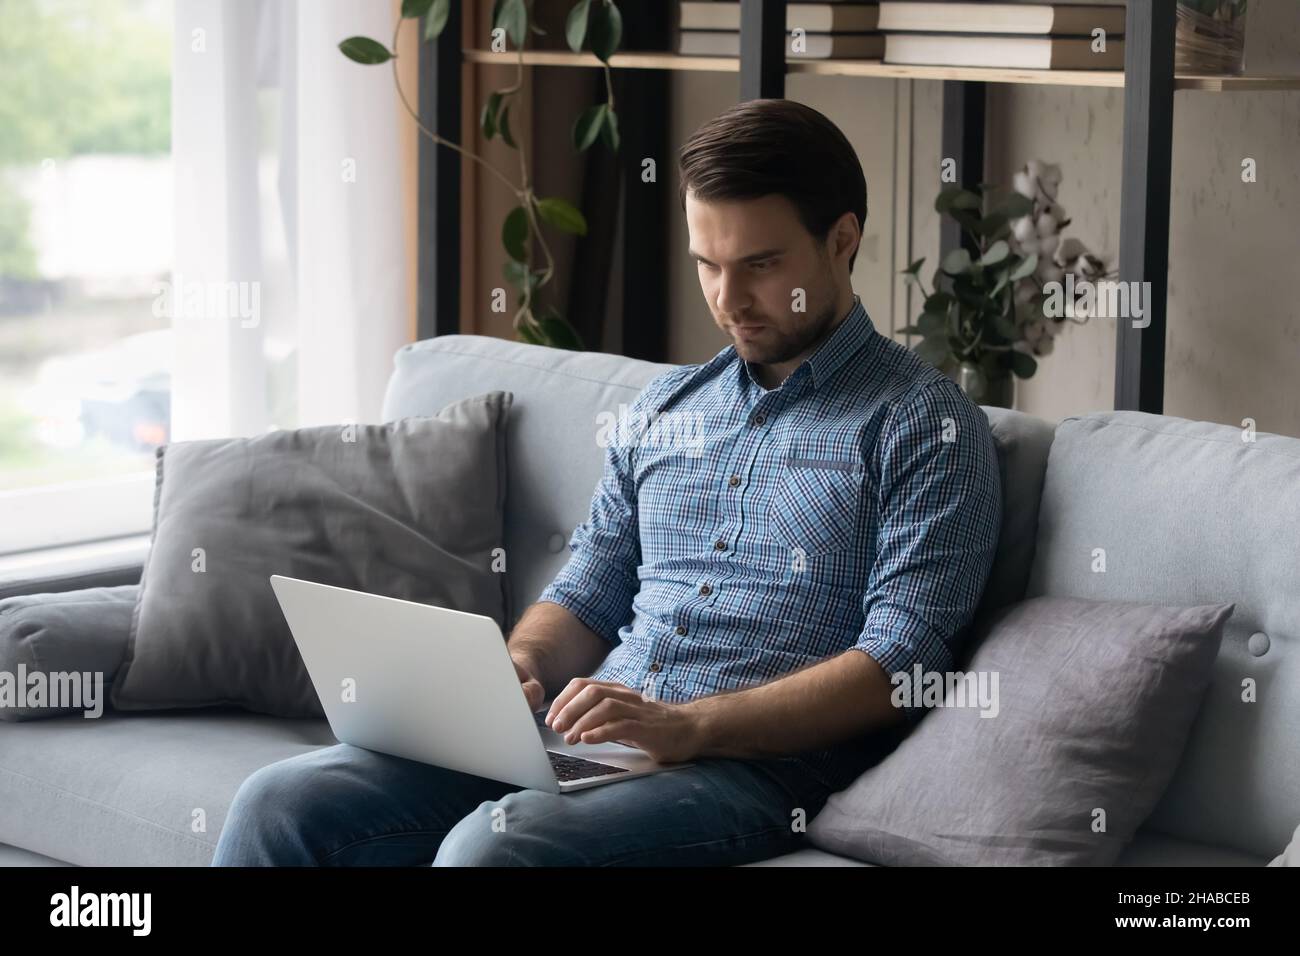 Serious focused man sit on couch at home with laptop Stock Photo